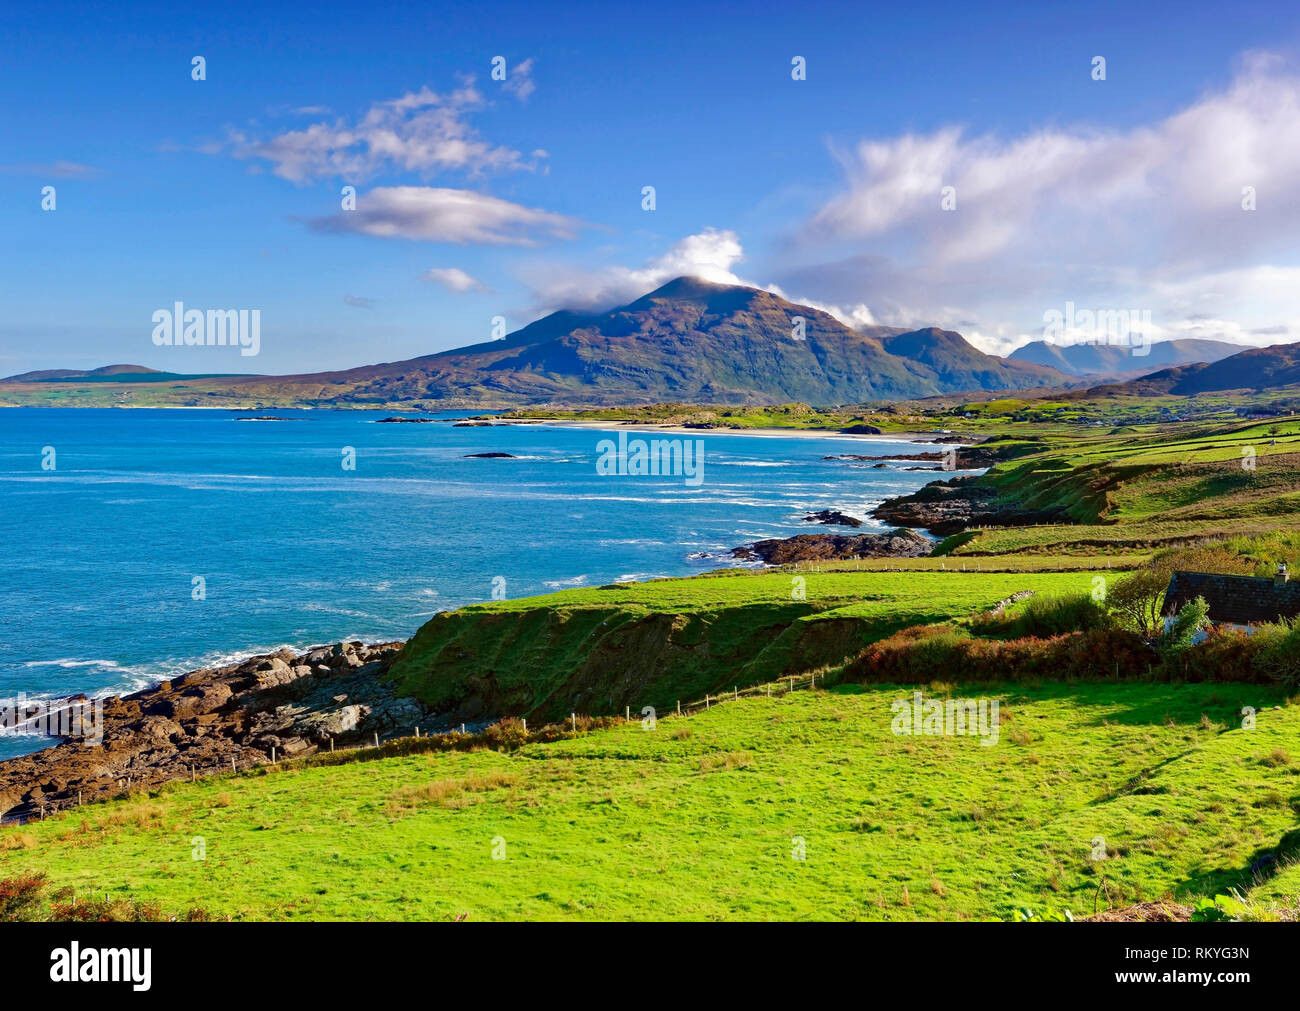 A sunny view of the Renvyle Peninsula on the west coast of Ireland. Stock Photo